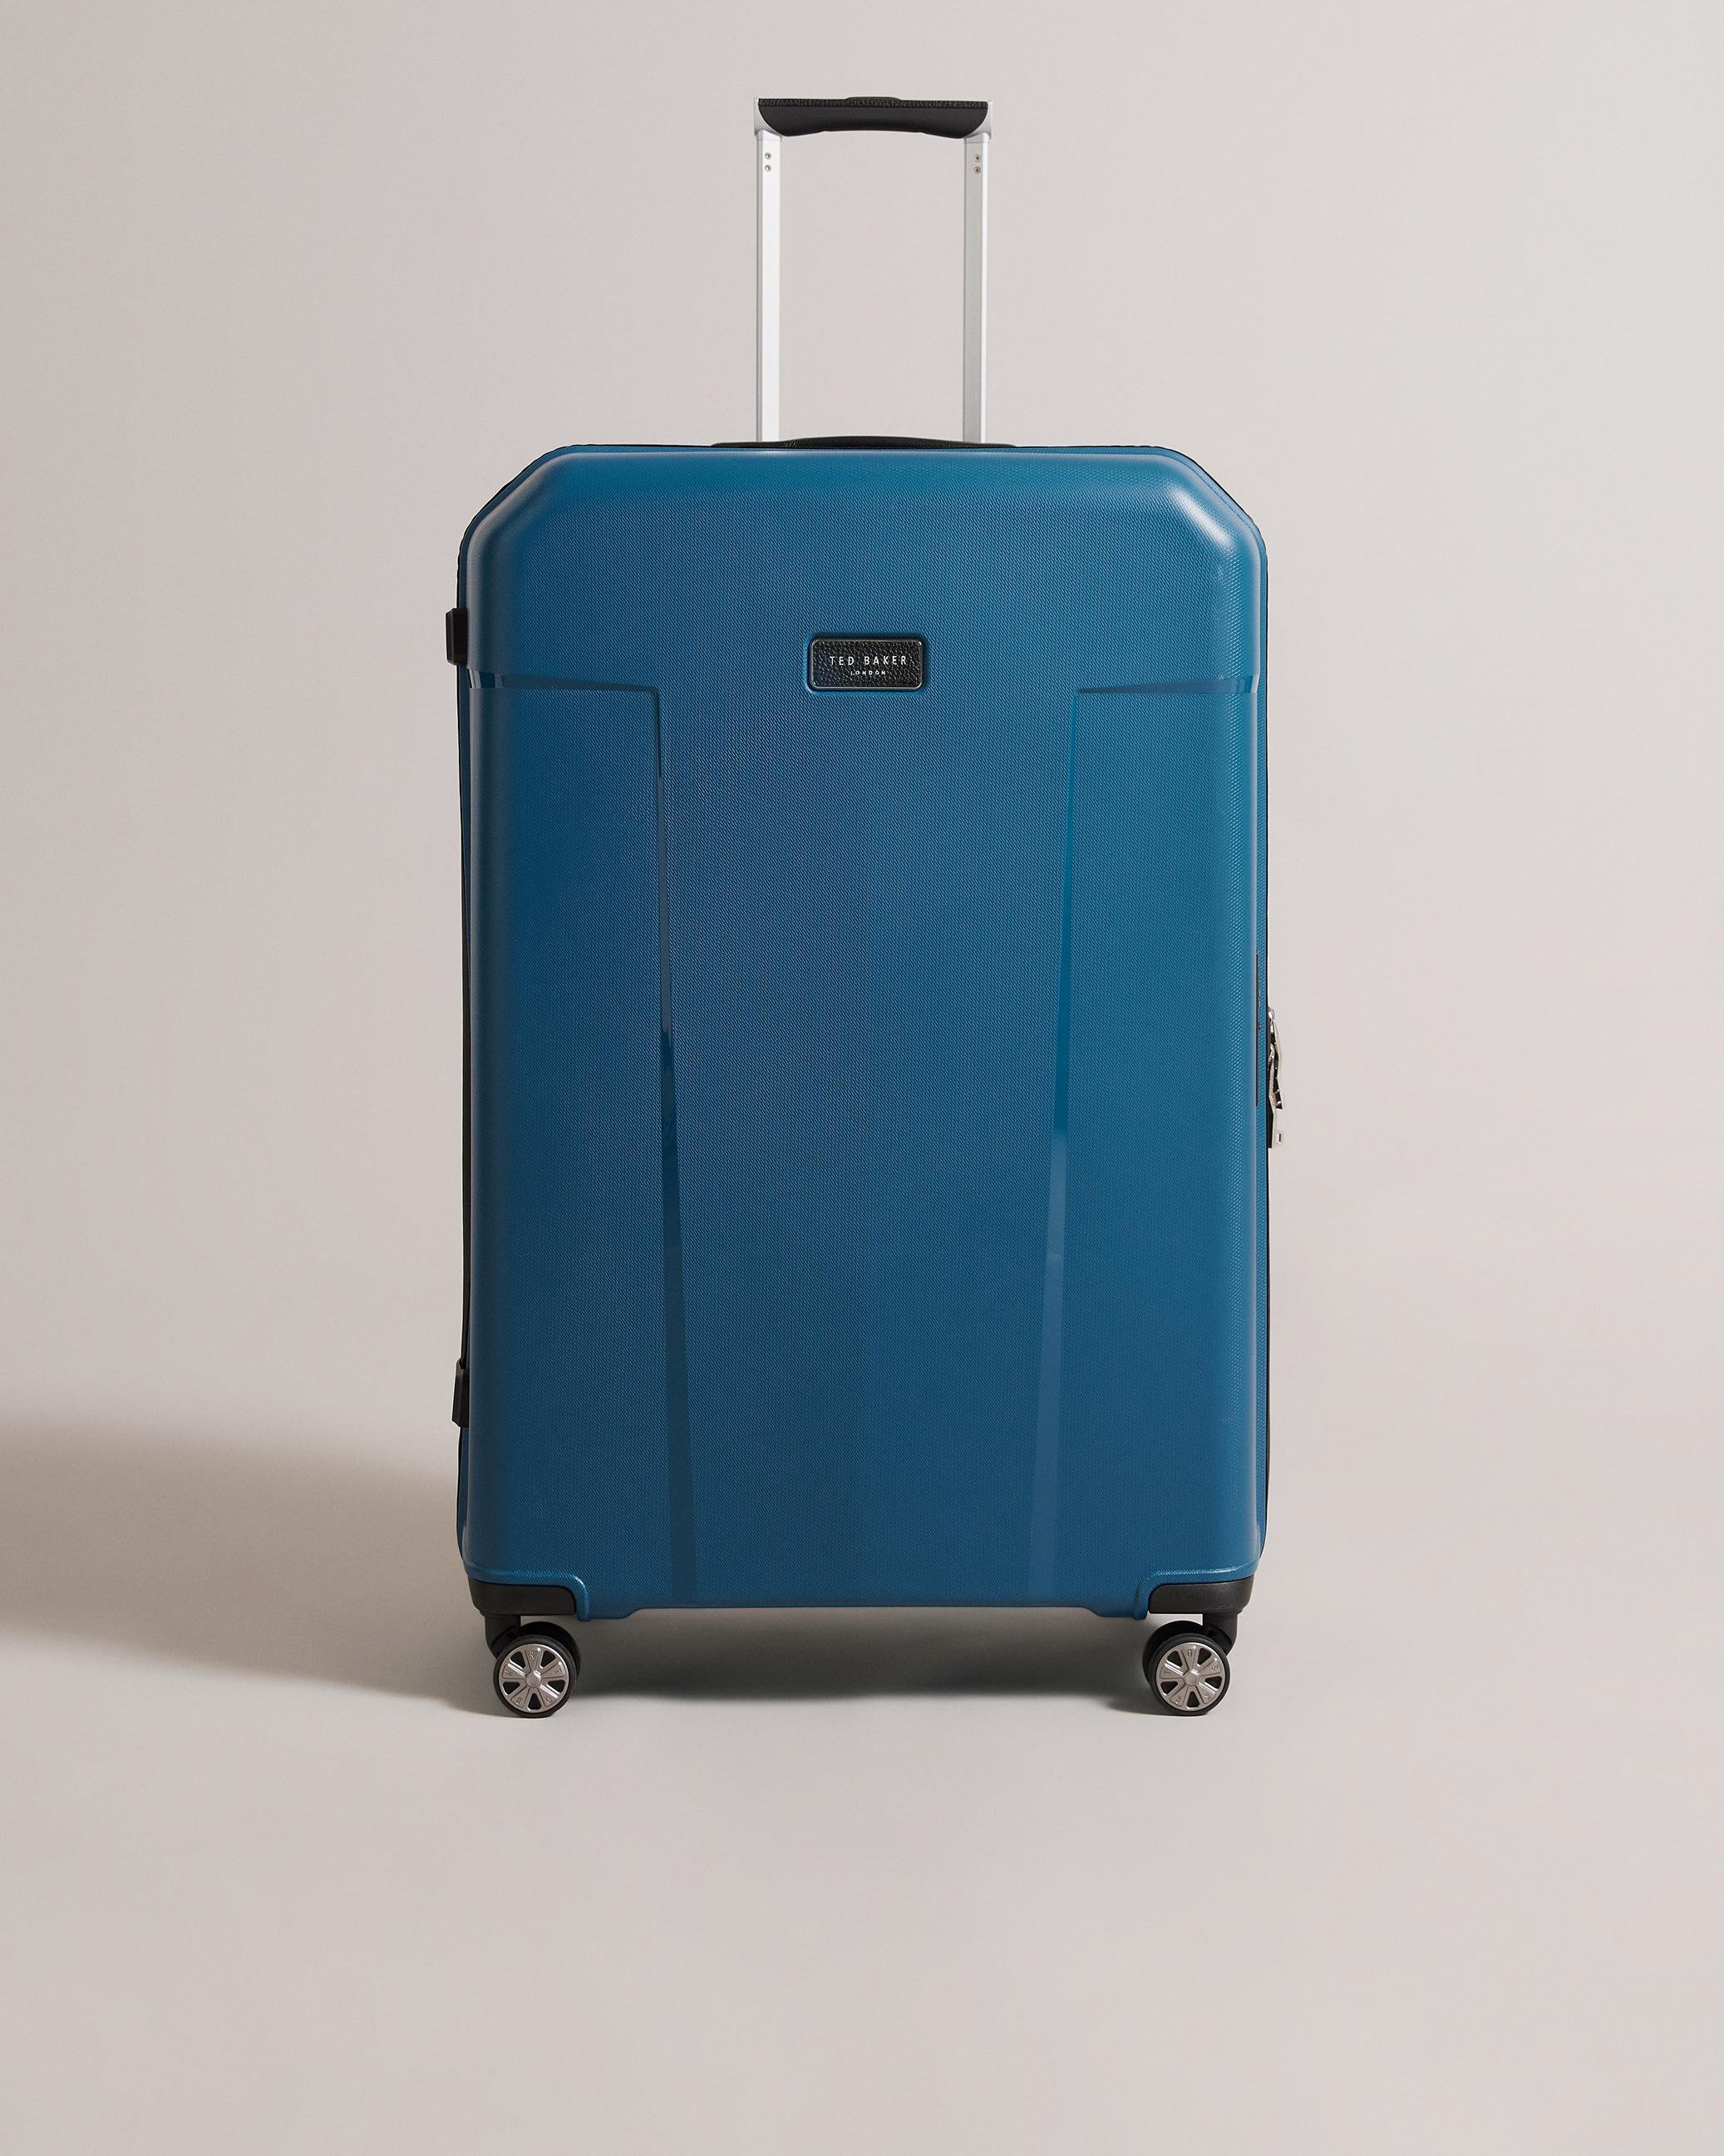 Flying Colours Large Trolley Suitcase - TRAVLL - Blue by TED BAKER